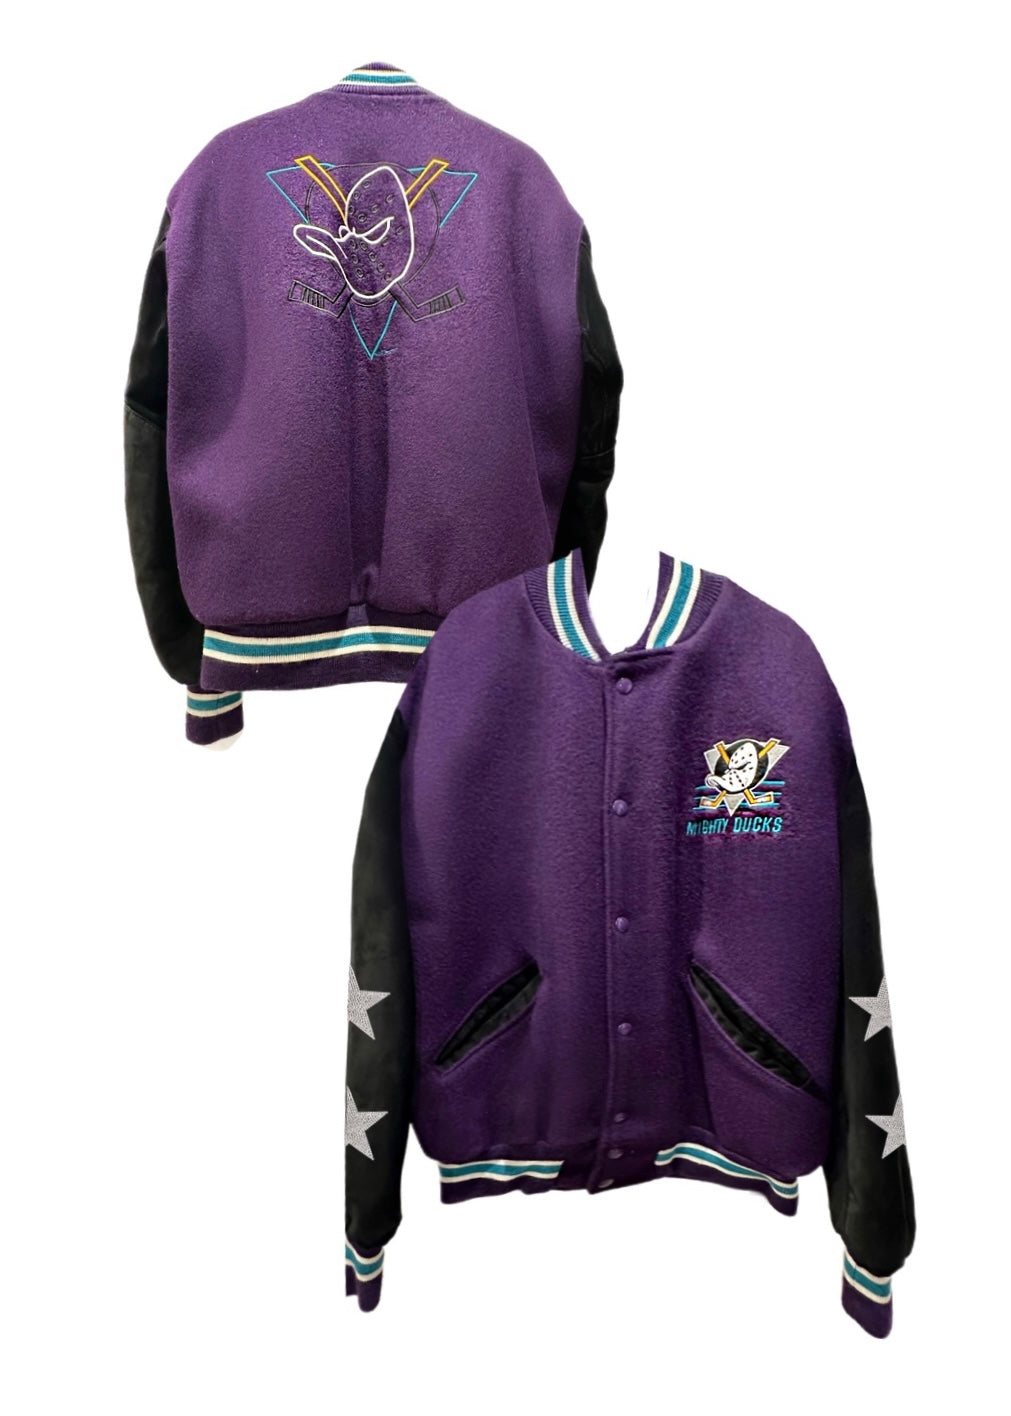 Anaheim Ducks, Mighty Duck Nhl, “Rare Find” One of A Kind Vintage Jacket with Crystal Star Design